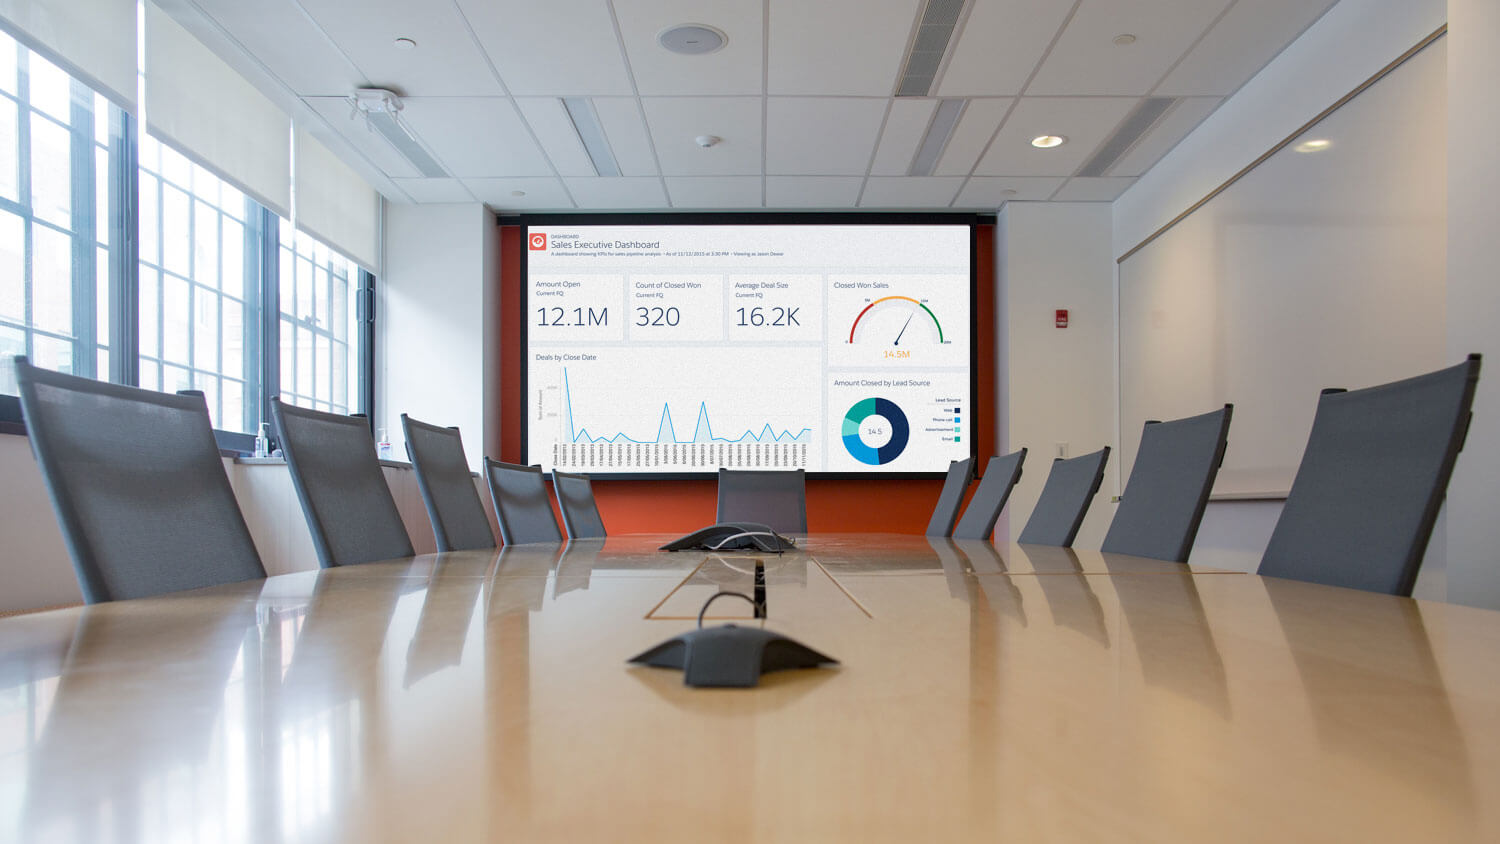 display salesforce dashboards in office